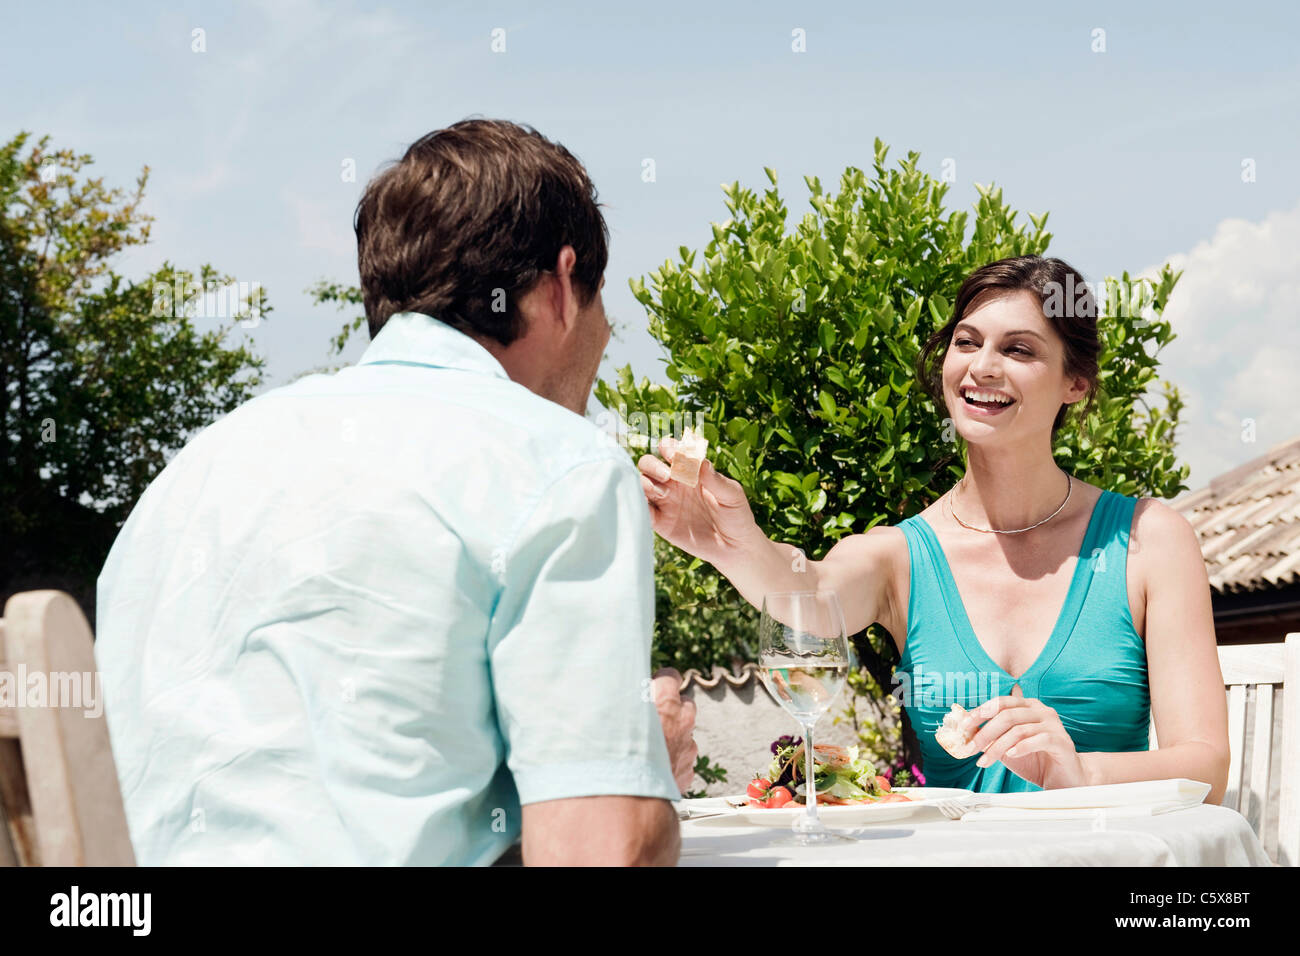 Italy, South Tyrol, Couple in restaurant, woman giving man a piece of bread Stock Photo